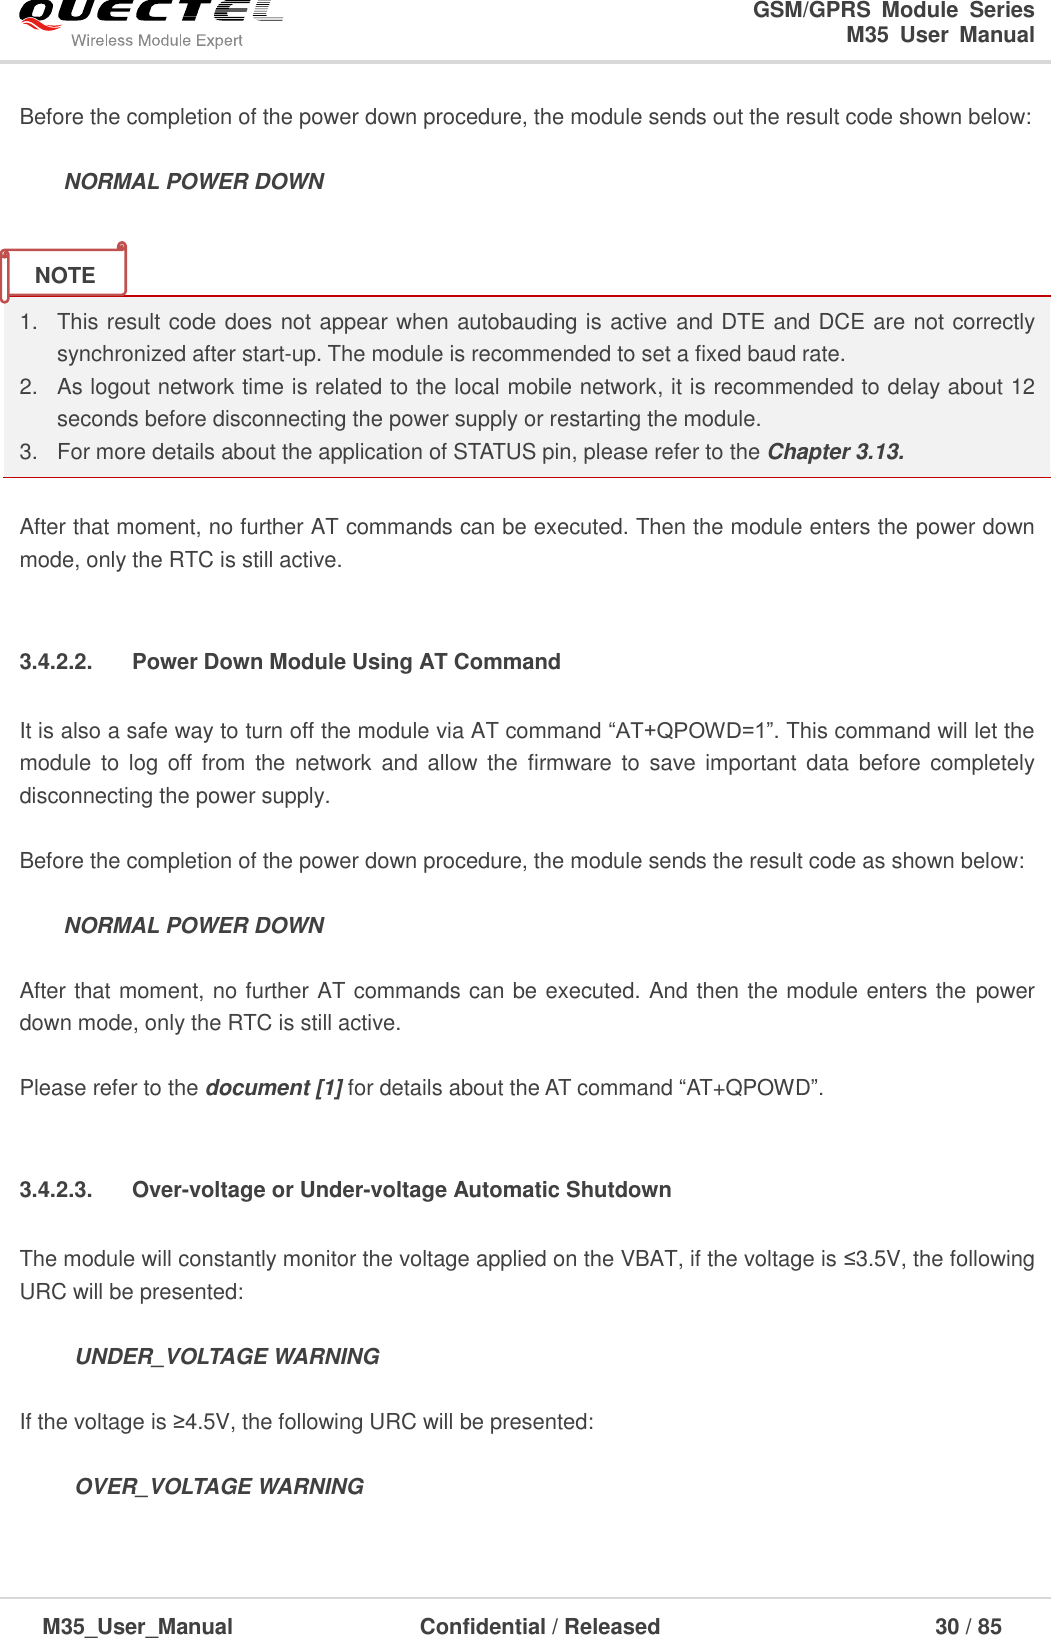                                                                              GSM/GPRS  Module  Series                                                                 M35  User  Manual  M35_User_Manual                                  Confidential / Released                             30 / 85    Before the completion of the power down procedure, the module sends out the result code shown below:    NORMAL POWER DOWN   1.  This result code does not appear when autobauding is active and DTE and DCE are not correctly synchronized after start-up. The module is recommended to set a fixed baud rate. 2.  As logout network time is related to the local mobile network, it is recommended to delay about 12 seconds before disconnecting the power supply or restarting the module. 3.  For more details about the application of STATUS pin, please refer to the Chapter 3.13.  After that moment, no further AT commands can be executed. Then the module enters the power down mode, only the RTC is still active.    3.4.2.2.  Power Down Module Using AT Command It is also a safe way to turn off the module via AT command ―AT+QPOWD=1‖. This command will let the module  to  log off  from  the network  and  allow the  firmware  to  save important data  before completely disconnecting the power supply.  Before the completion of the power down procedure, the module sends the result code as shown below:    NORMAL POWER DOWN  After that moment, no further AT commands can be executed. And then the module enters the power down mode, only the RTC is still active.    Please refer to the document [1] for details about the AT command ―AT+QPOWD‖.    3.4.2.3.  Over-voltage or Under-voltage Automatic Shutdown The module will constantly monitor the voltage applied on the VBAT, if the voltage is ≤3.5V, the following URC will be presented:           UNDER_VOLTAGE WARNING  If the voltage is ≥4.5V, the following URC will be presented:       OVER_VOLTAGE WARNING  NOTE 